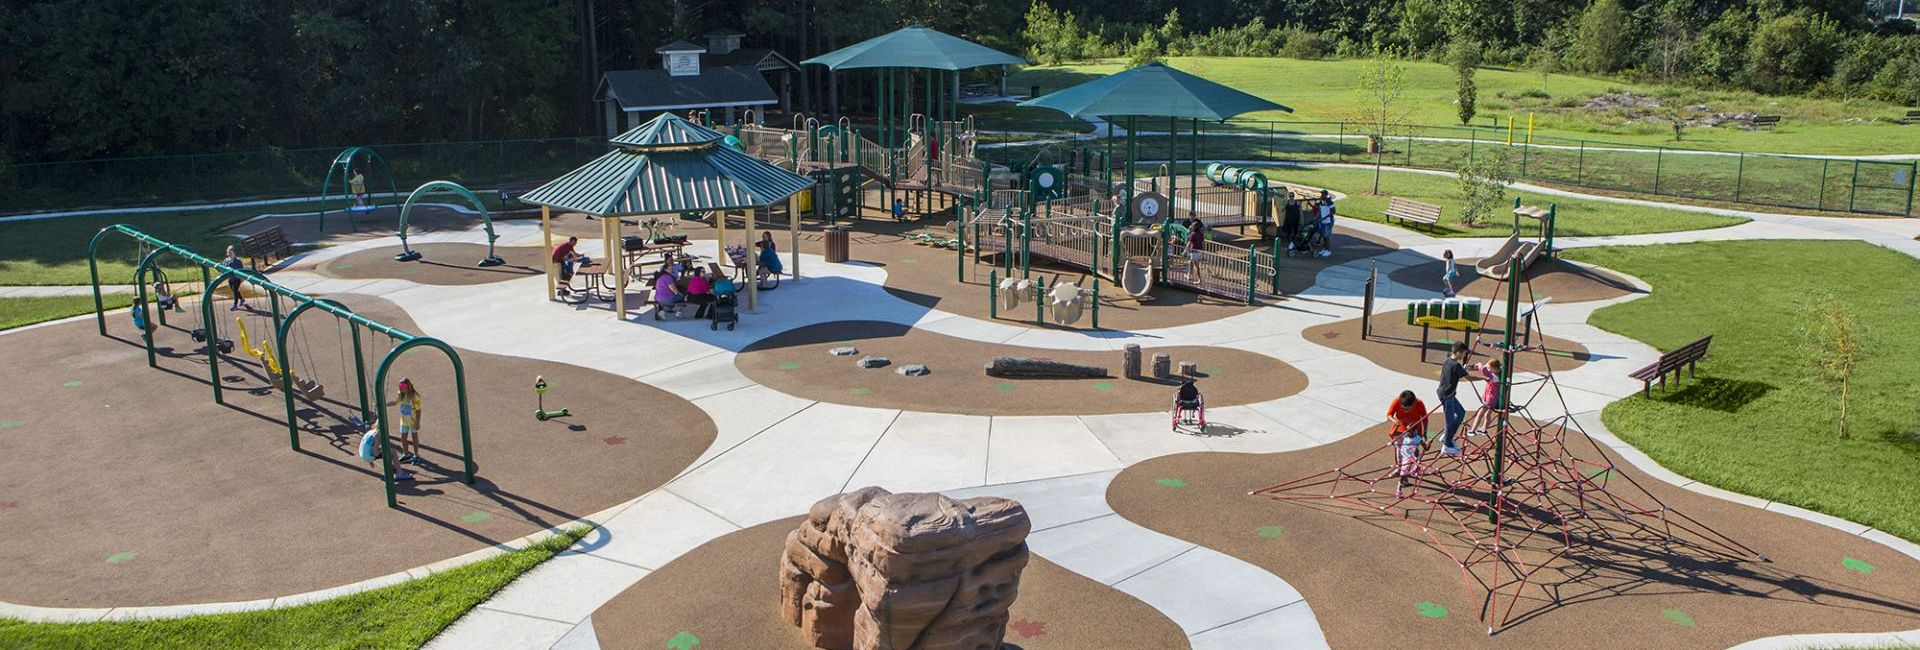 Featured image of Park with teal covers, winding sidewalk throughout and patches of brown turf with children playing 